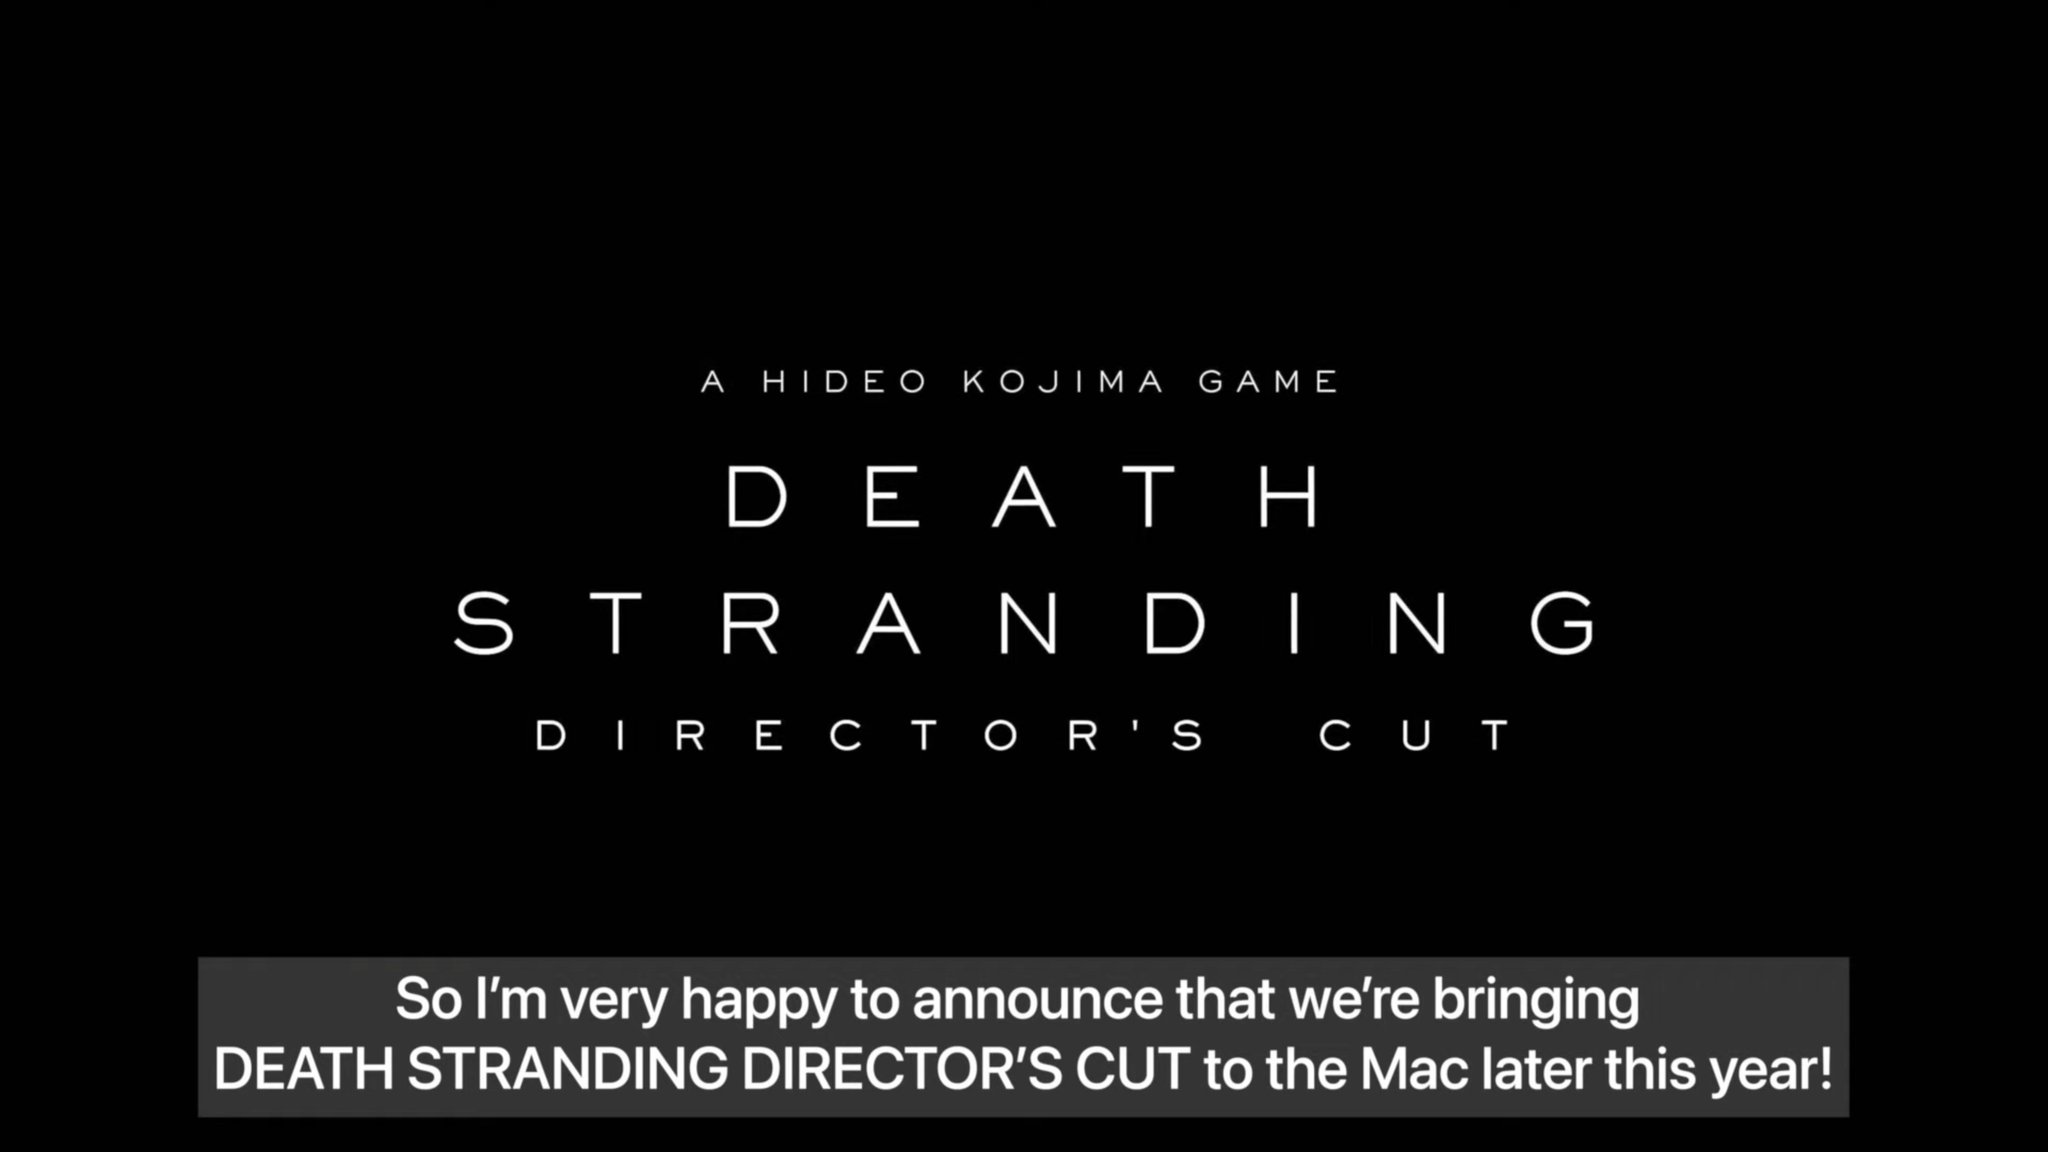 Metal Gear Solid MGN on Twitter: "BREAKING: Hideo Kojima presenting at WWDC  23, showing Death Stranding DCcoming to the MAC. #WWDC23  https://t.co/6BslMFqwln" / Twitter